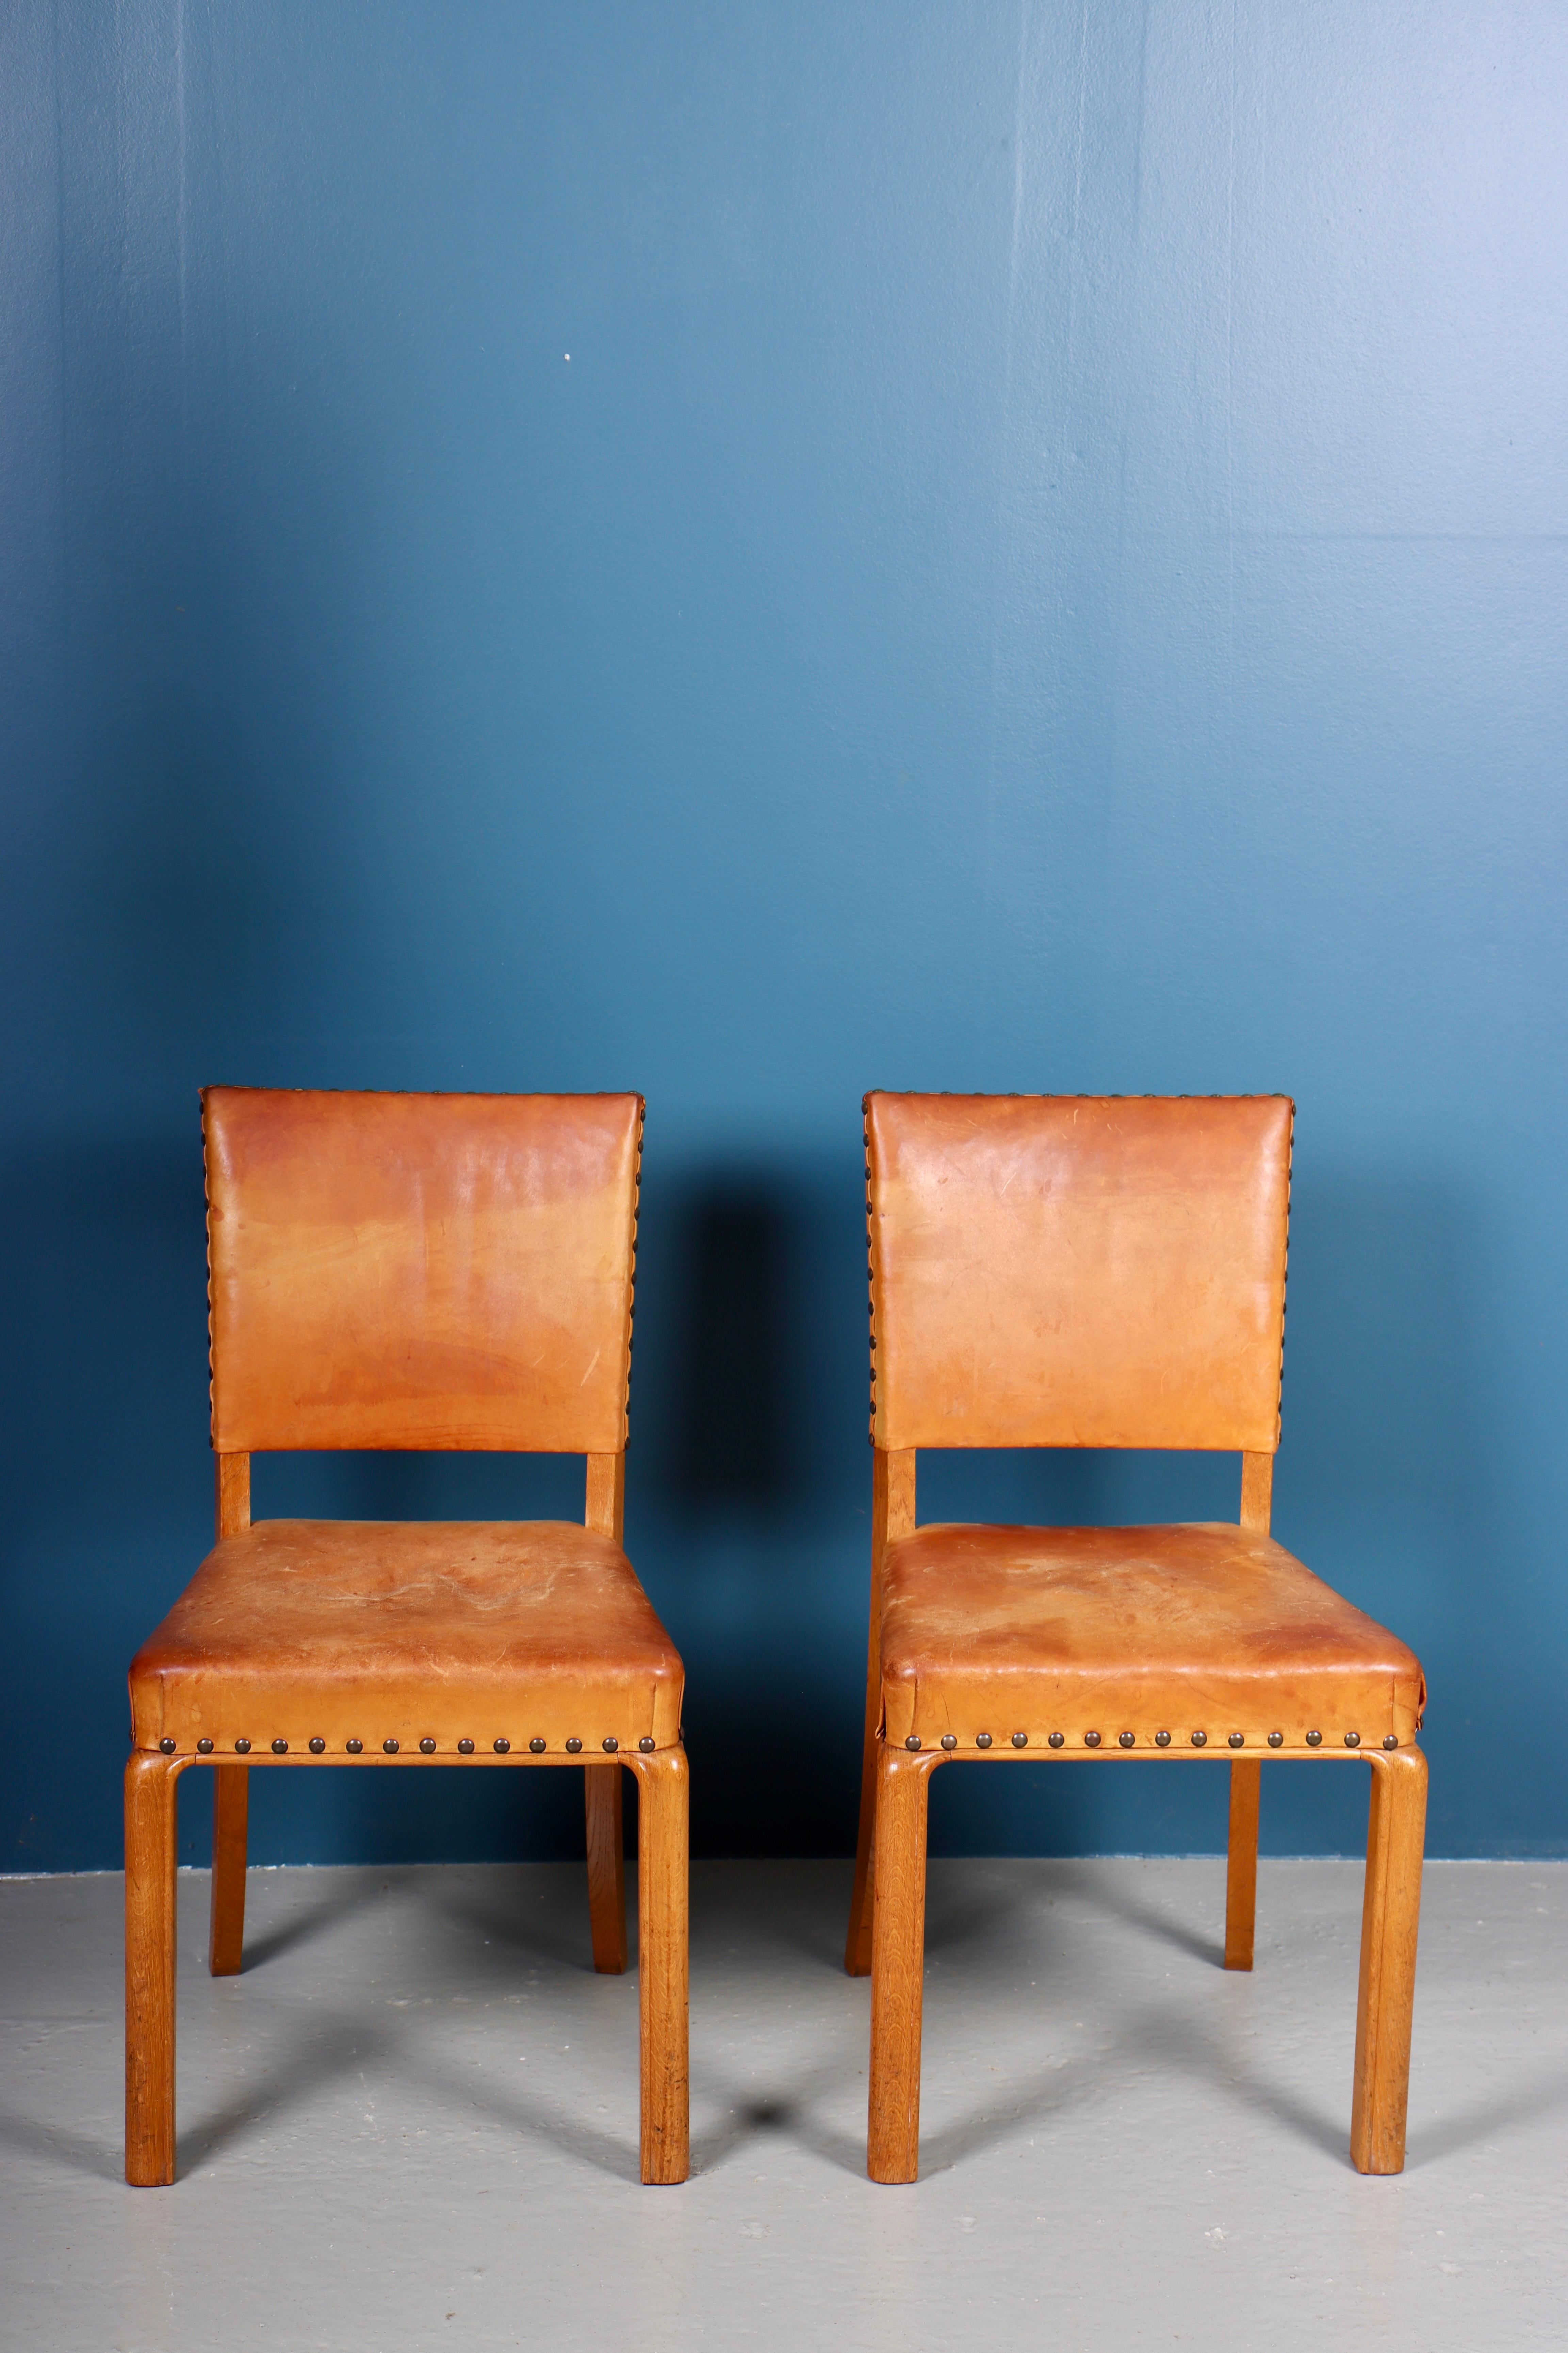 Scandinavian Modern Pair of Danish Mid Century Side Chairs in Patinated Leather, 1940s For Sale